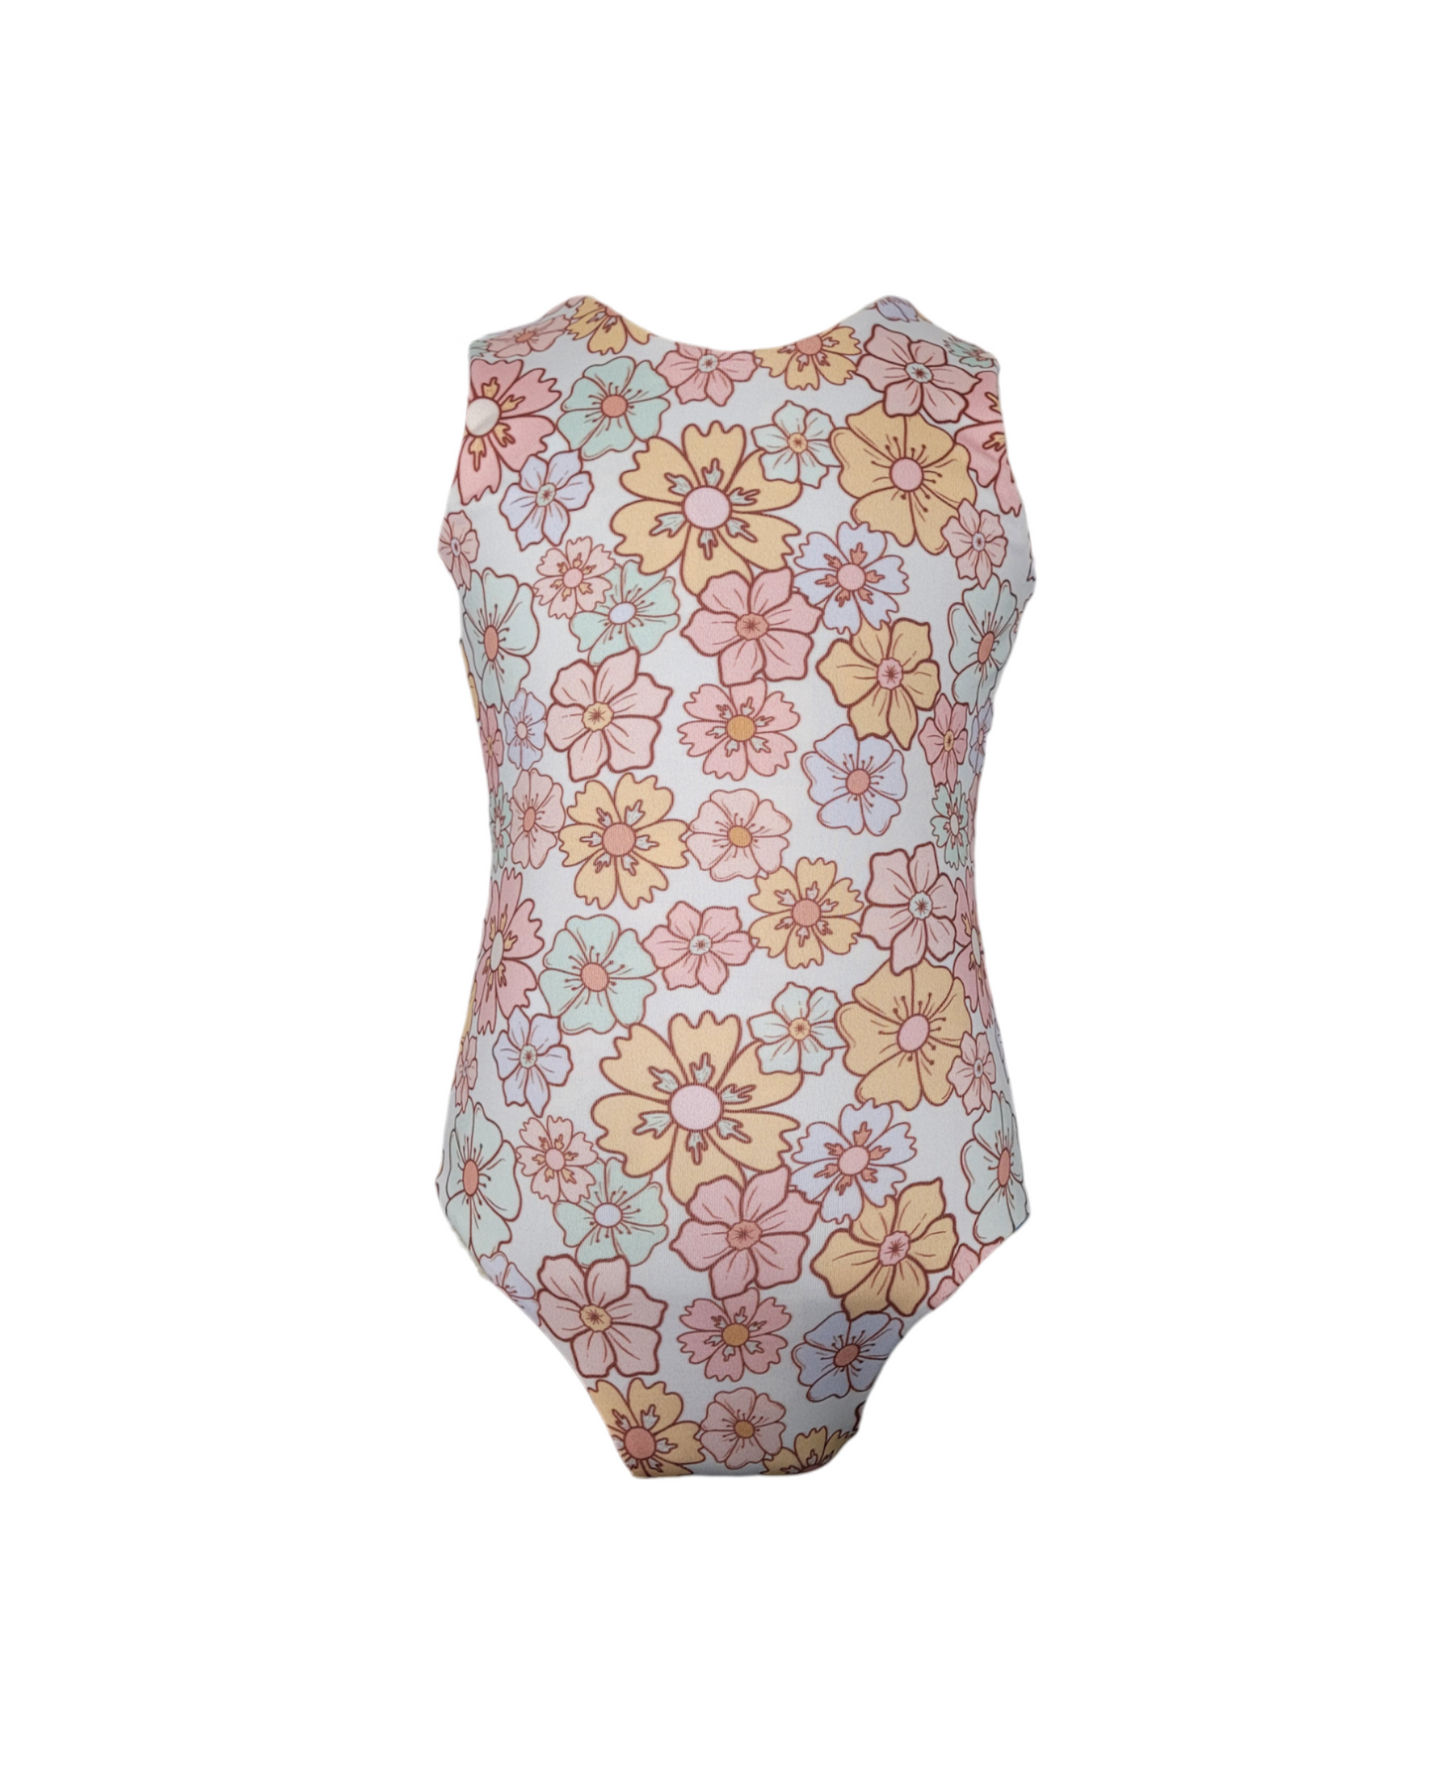 Girls reversible swimsuit. Light Pink with pastel flowers.